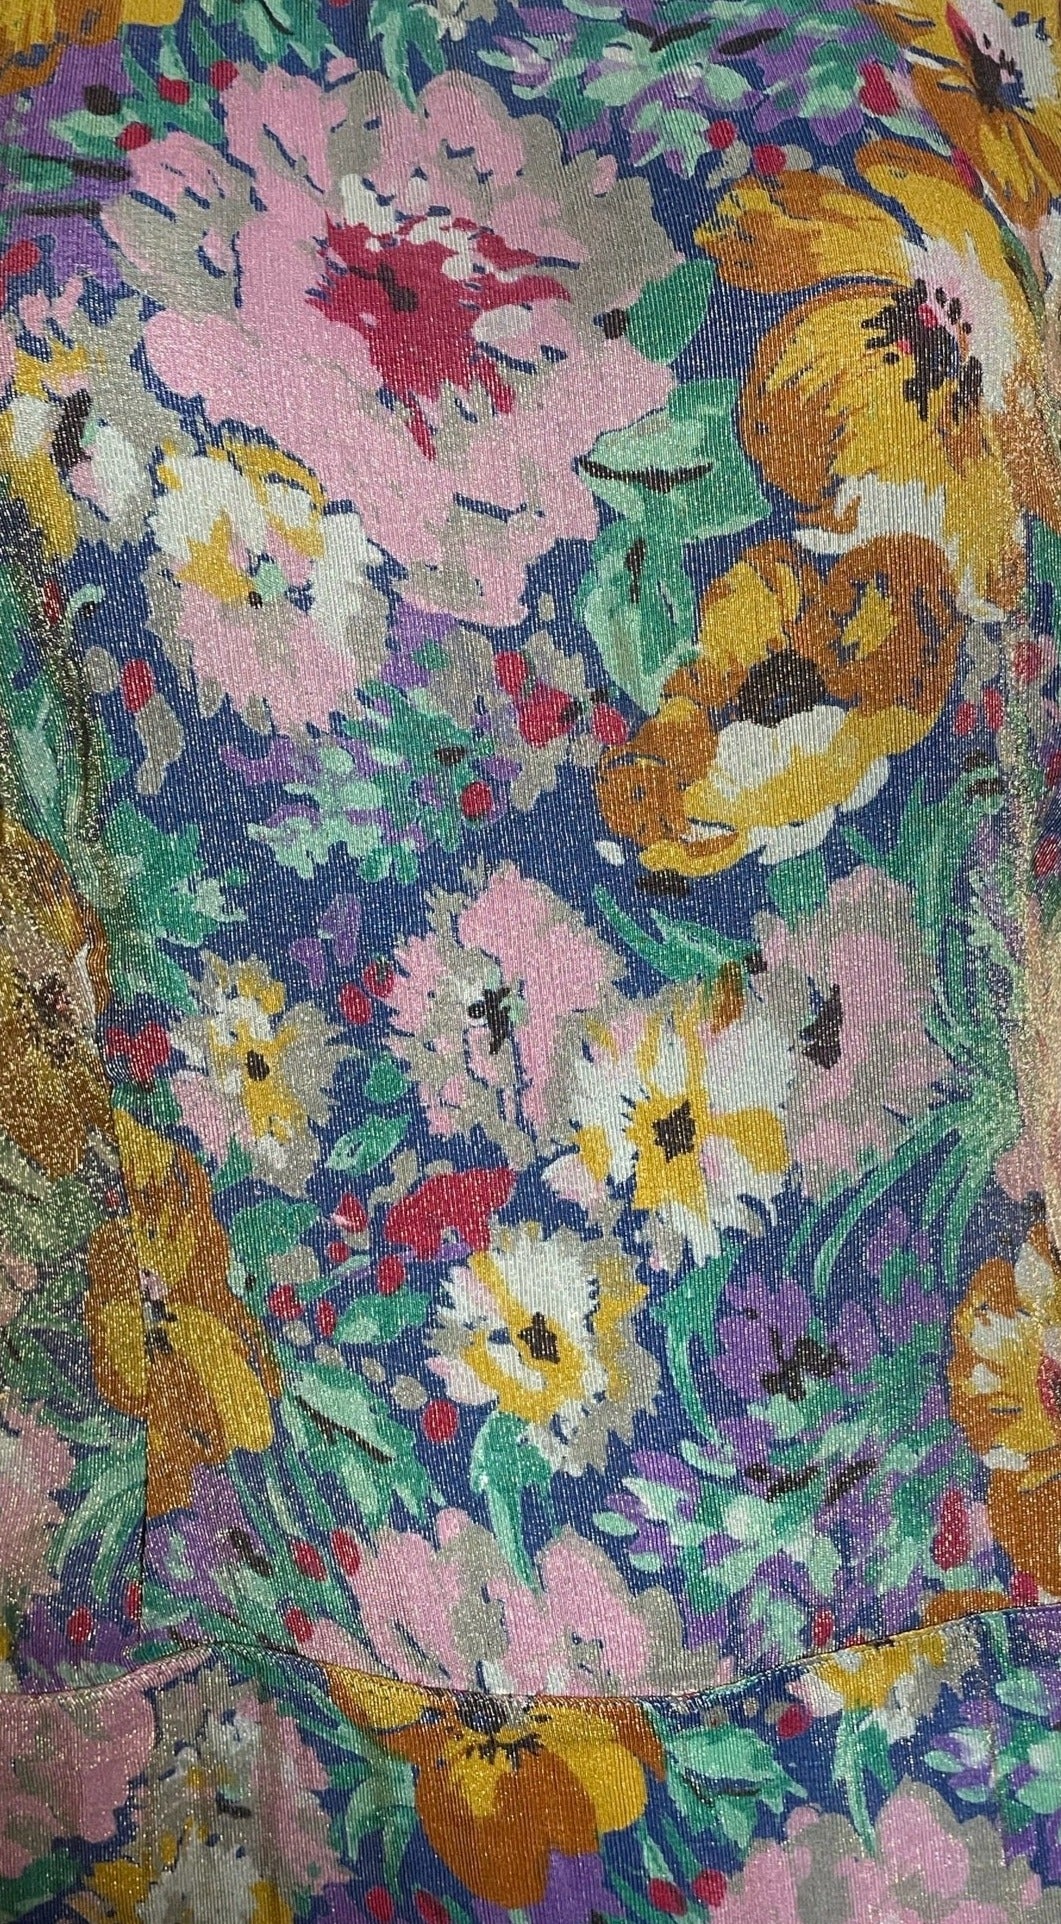 Late 20s/ Early 30s Floral Lame Bias Cut Dress DETAIL 3 of 3